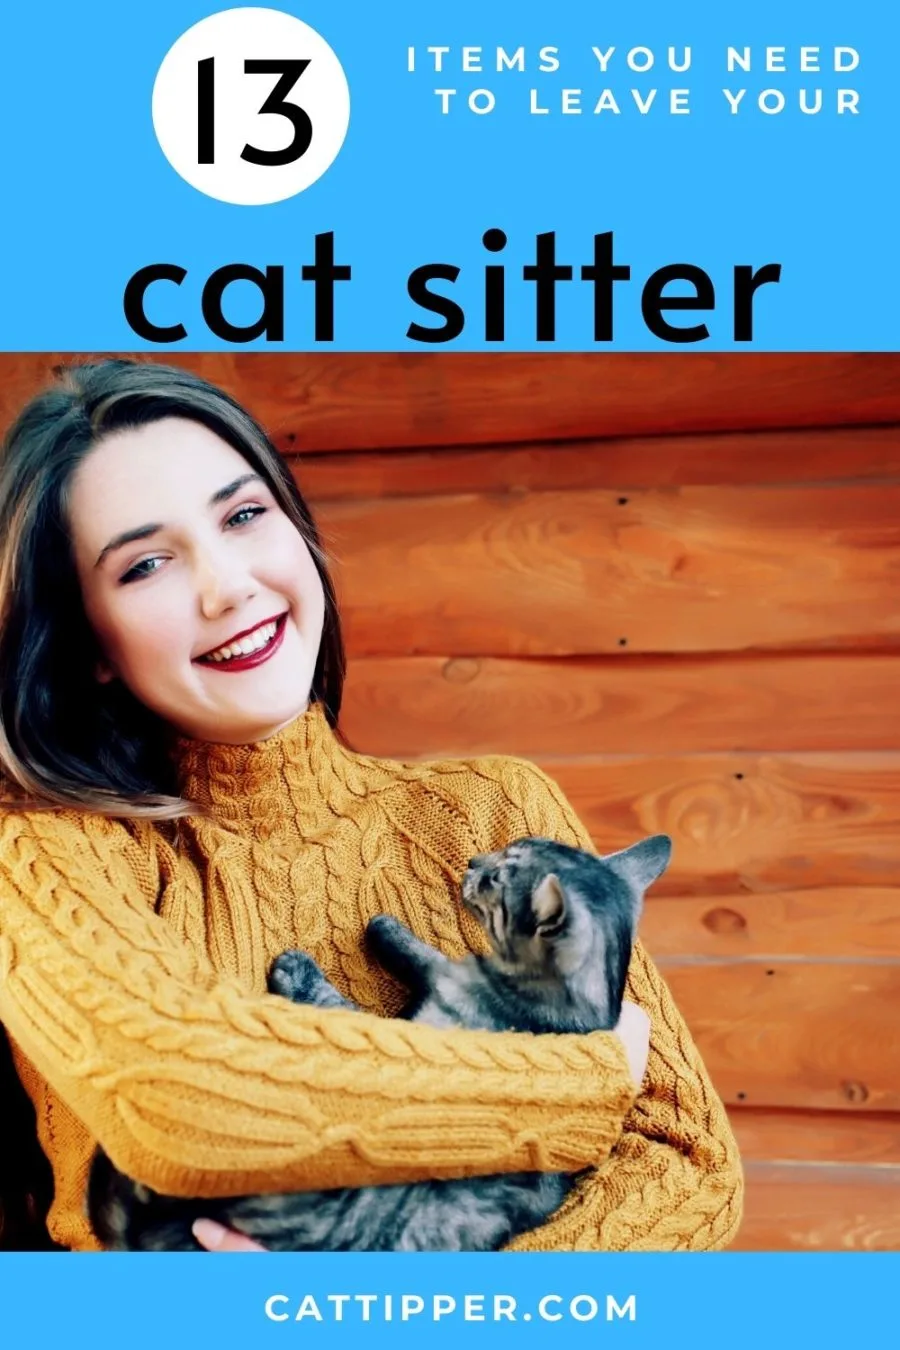 13 items you need to leave your cat sitter